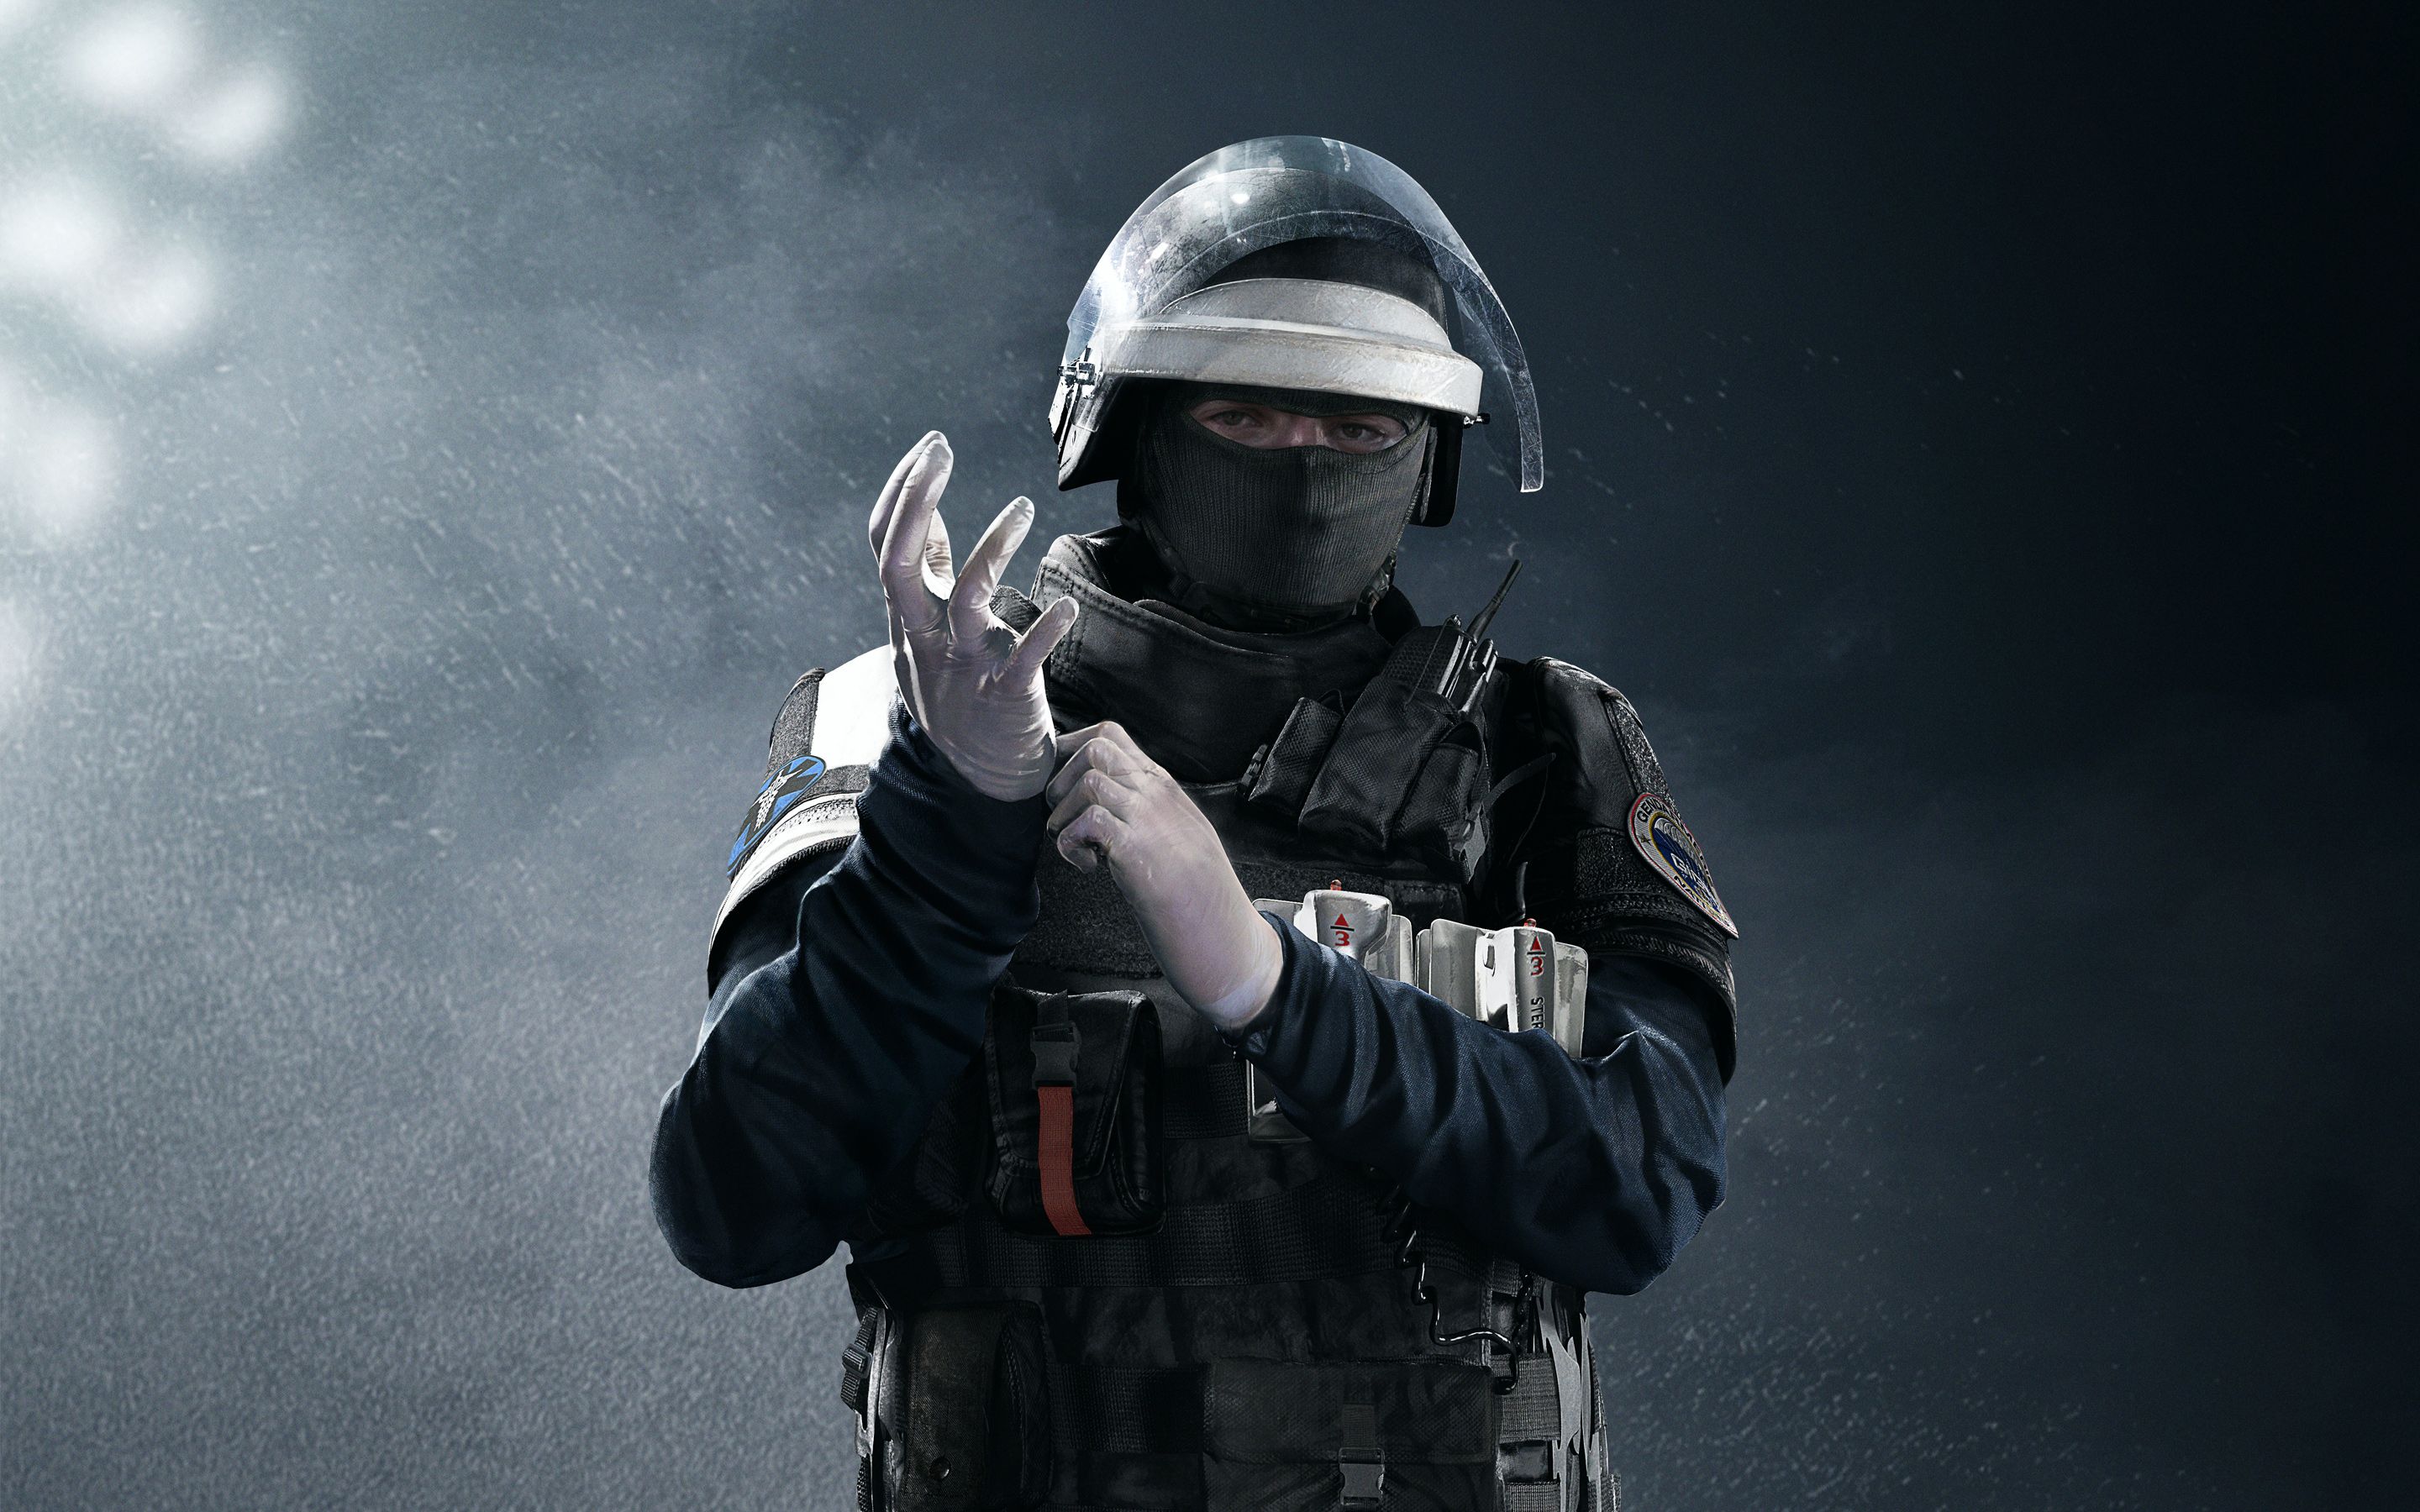 Rainbow Six Siege stats: The best stats websites and resources